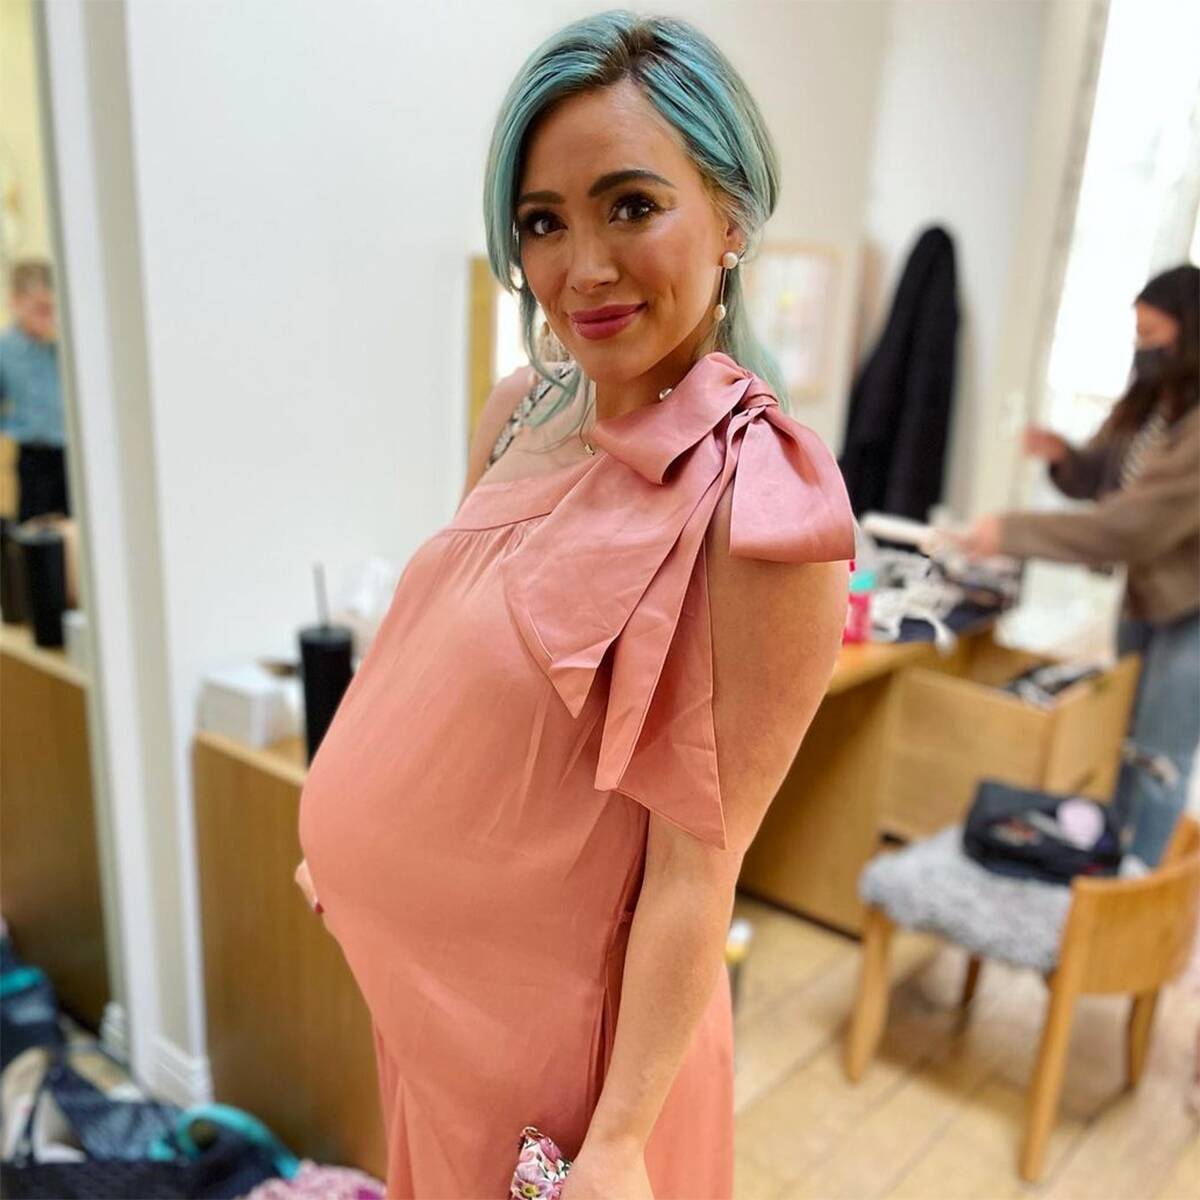 Hilary Duff Switches Up Her Hair After Welcoming Baby: See Her Blue to Blonde Transformation